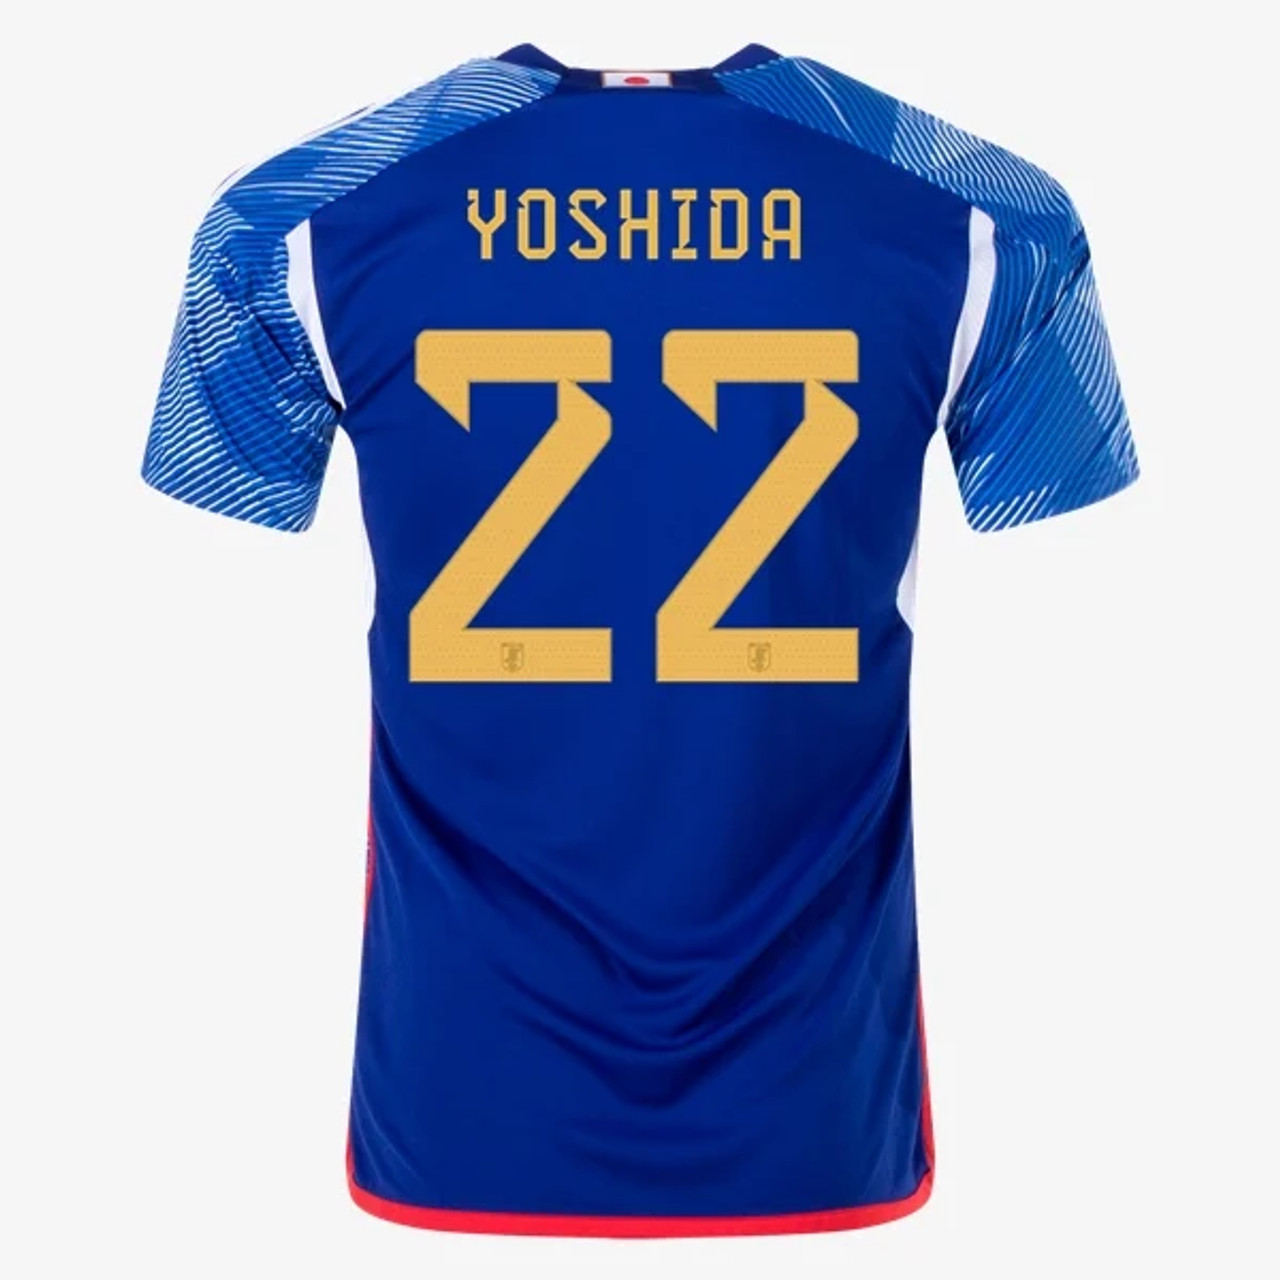 ADIDAS JAPAN WORLD CUP 2022 HOME JERSEY - Soccer Plus